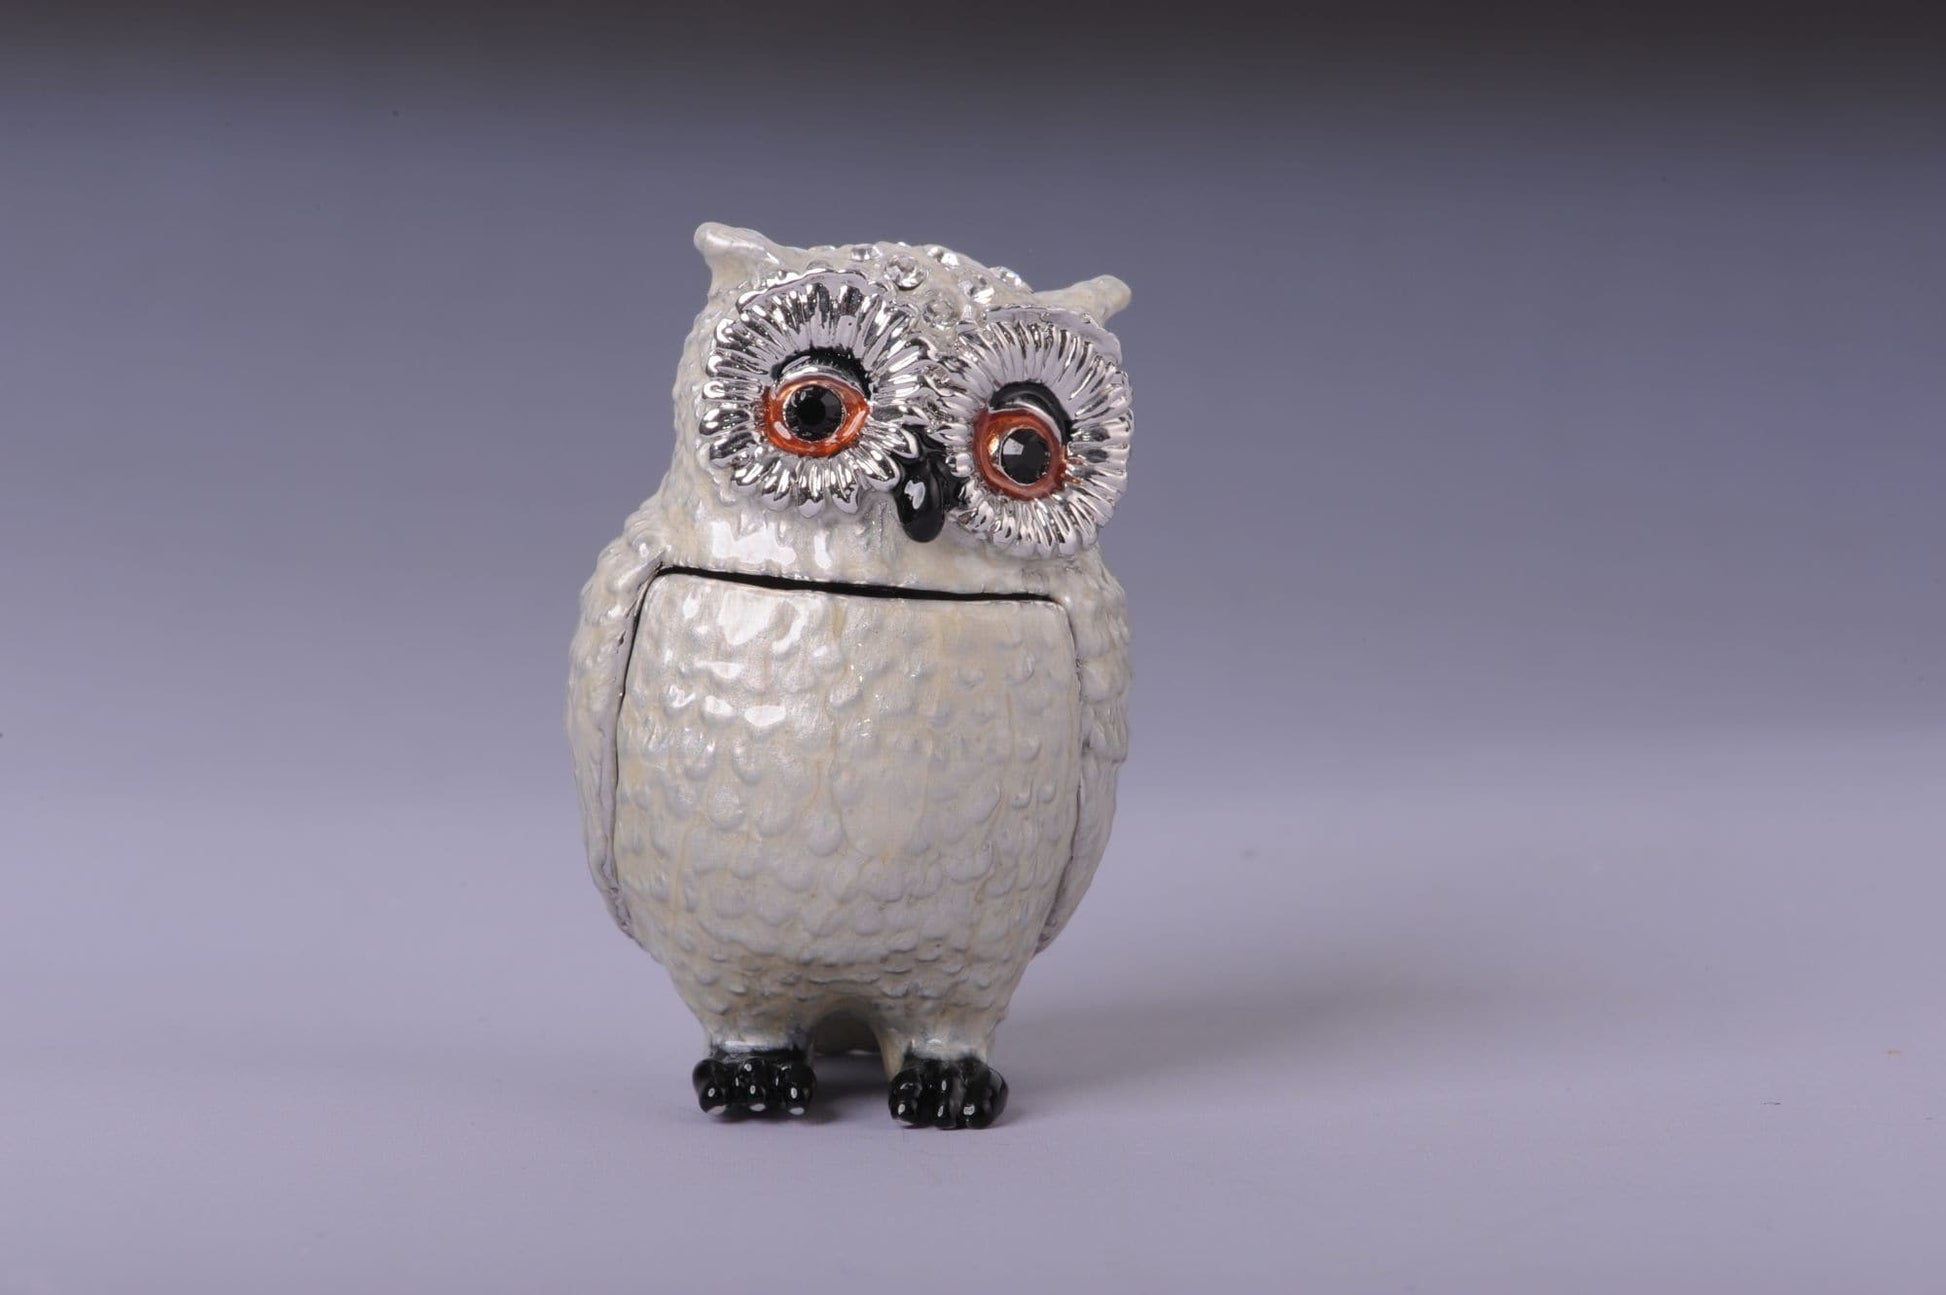 Silver and White Owl | Treasures of my HeART